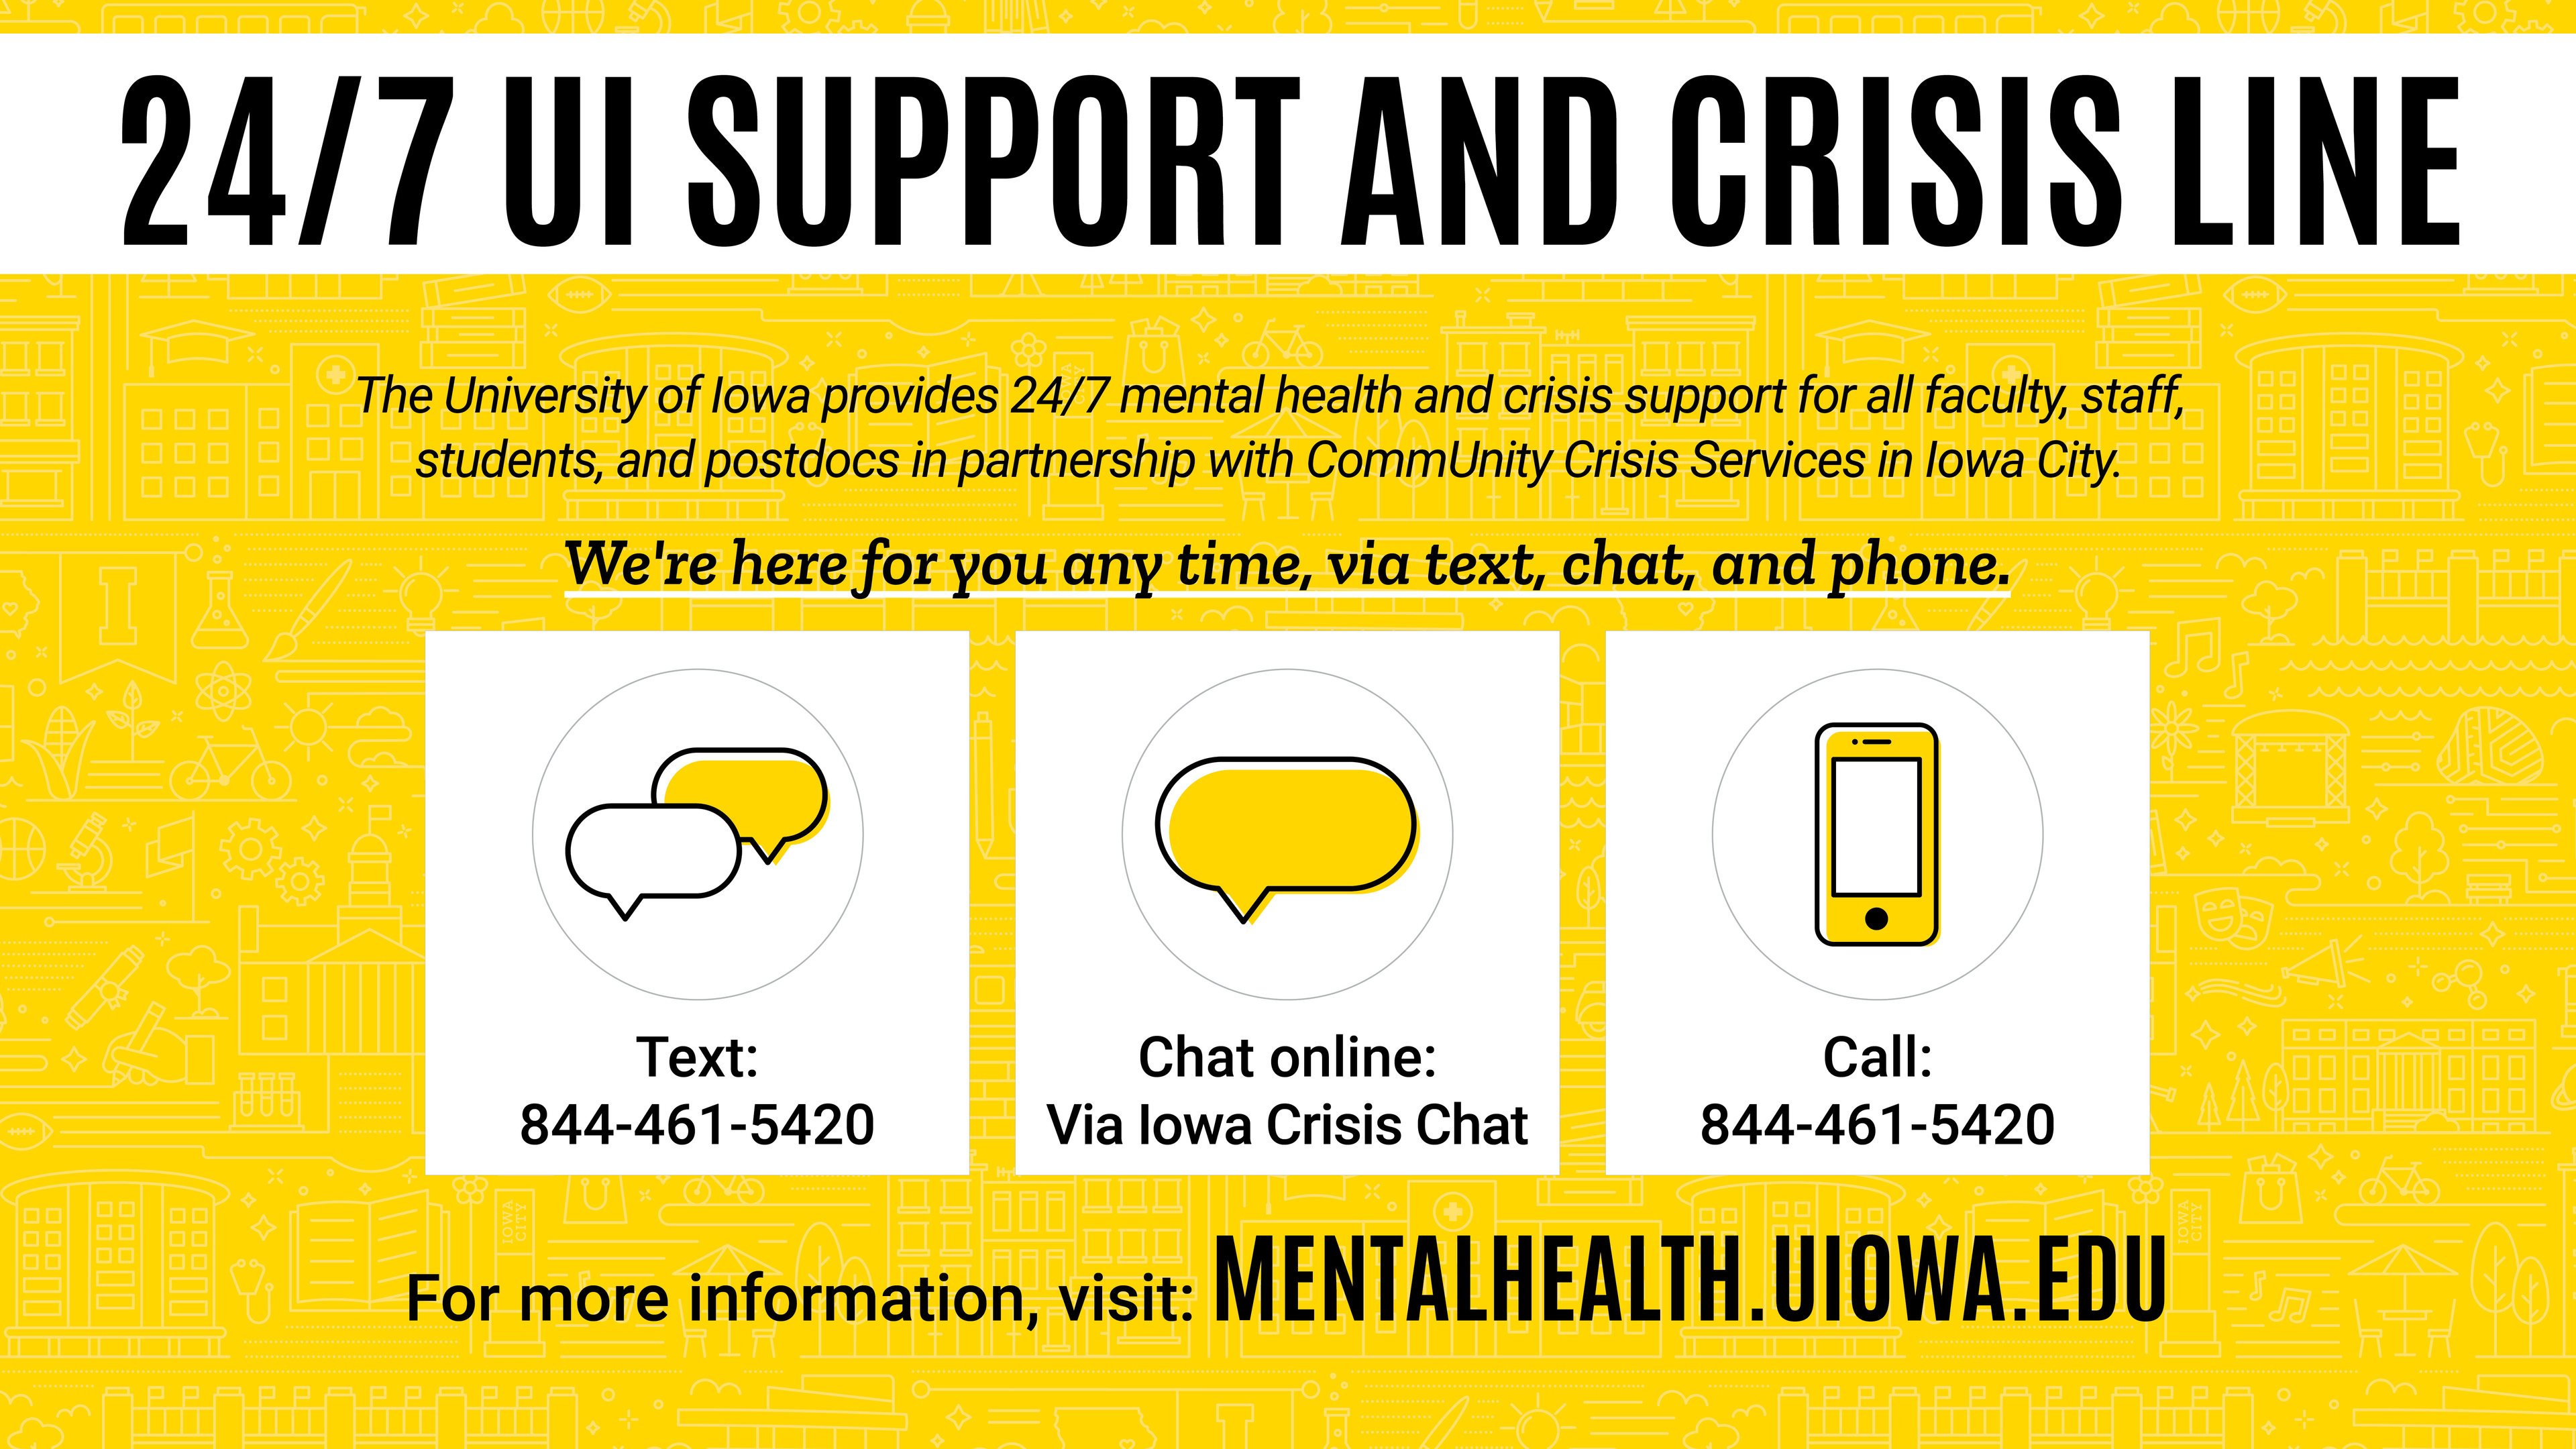 UI Support and Crisis Line, text or call 8444615420